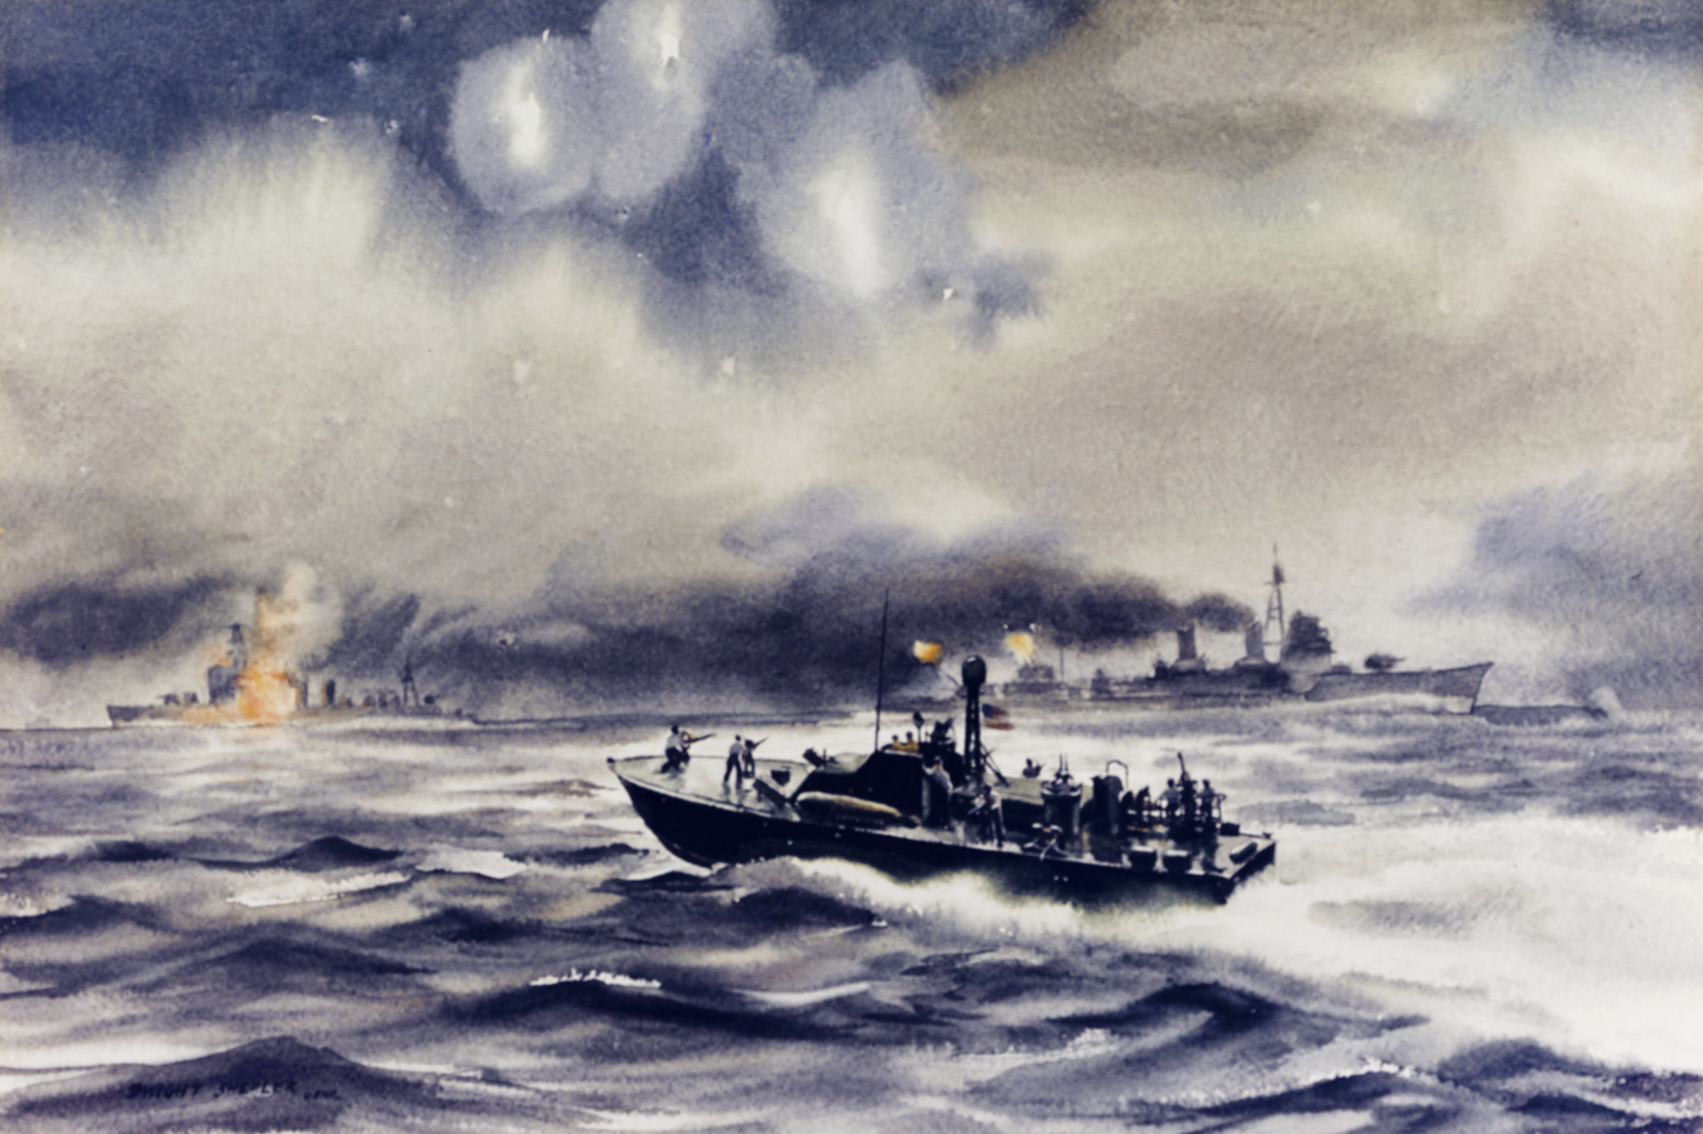 American PT-boats like the one in this artist’s rendering struck the first blows during the Battle of Surigao Strait. The Mogami was severely damaged in the one-sided battle and later her blackened hulk was sunk. 